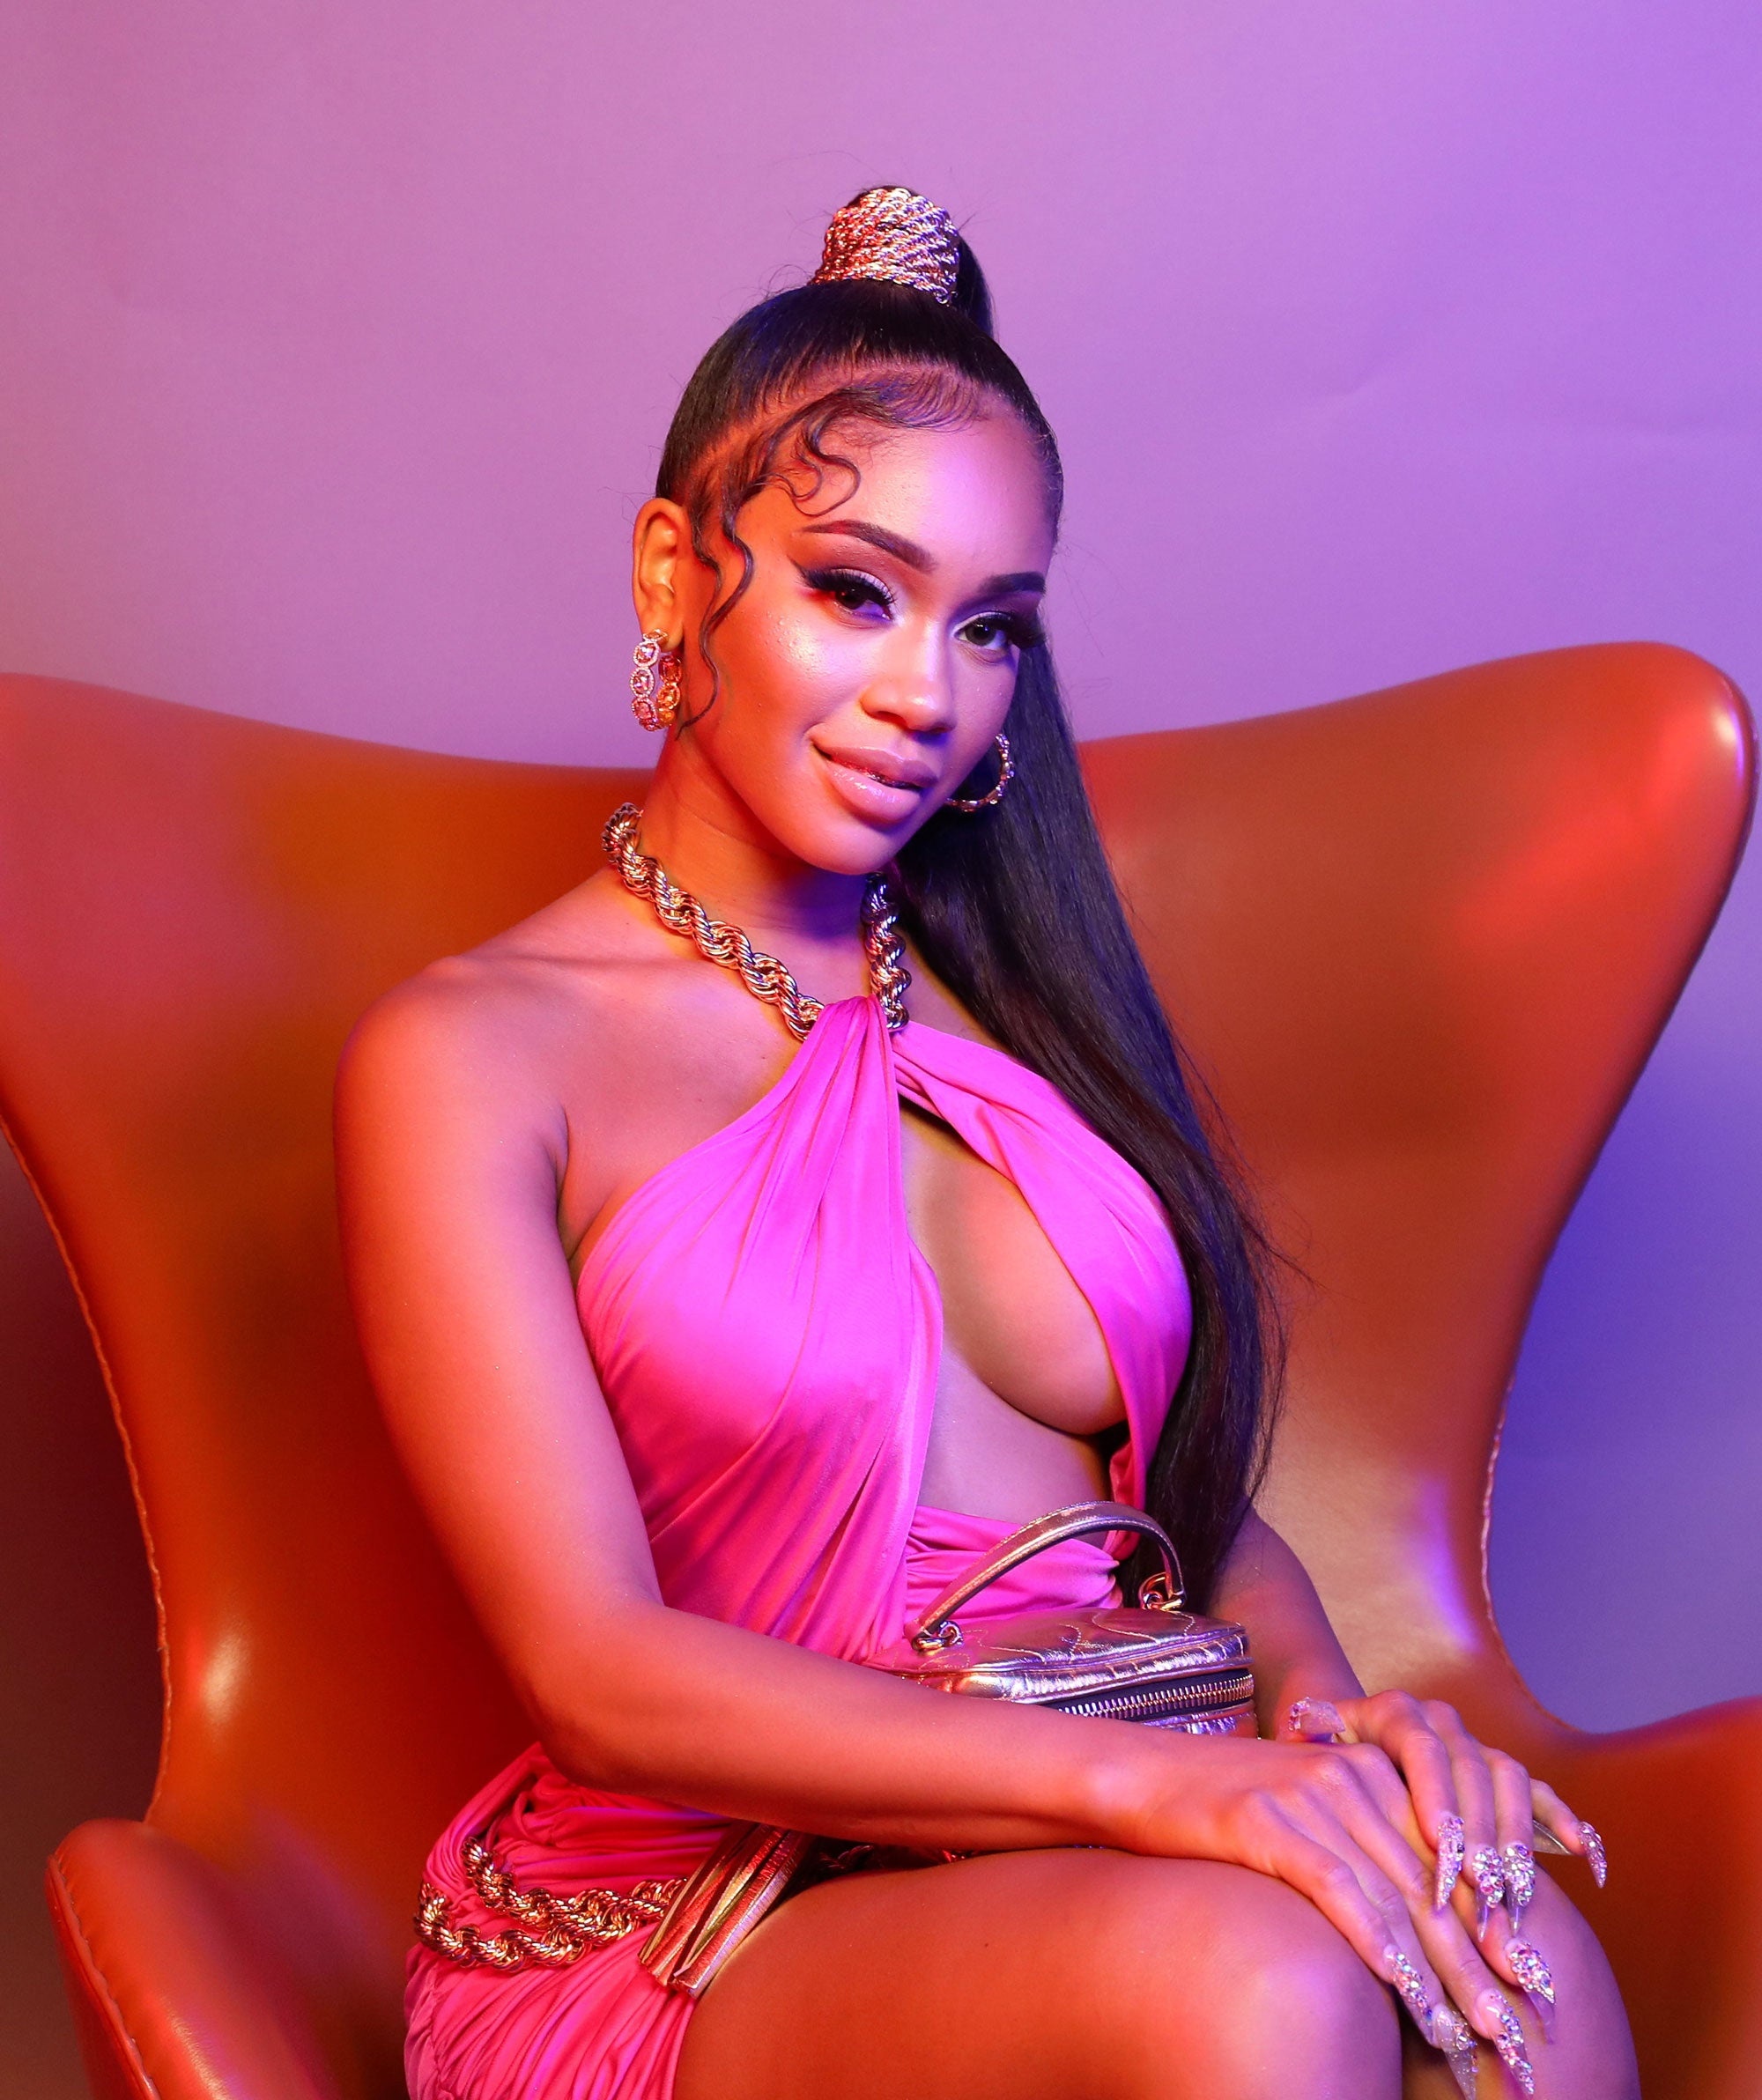 Saweetie x Morphe, Beauty interview, Makeup and skincare, Celebrity collaboration, 2000x2390 HD Handy